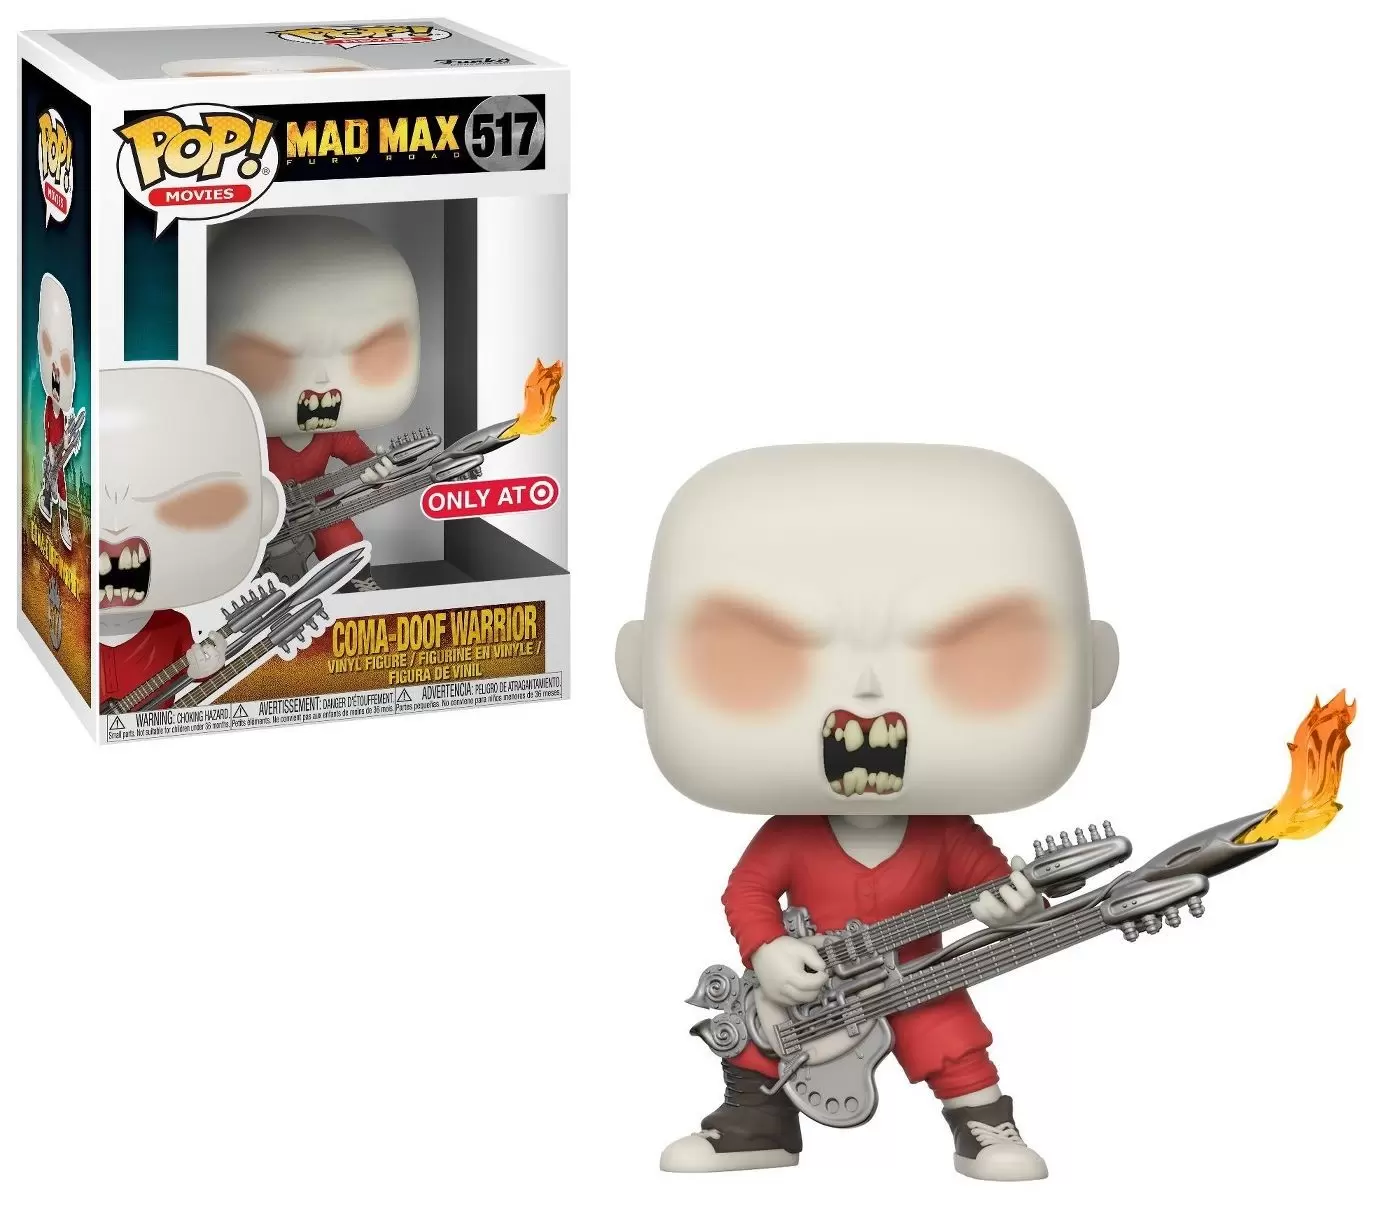 POP! Movies - Mad Max Fury Road - Coma-Doof with flames